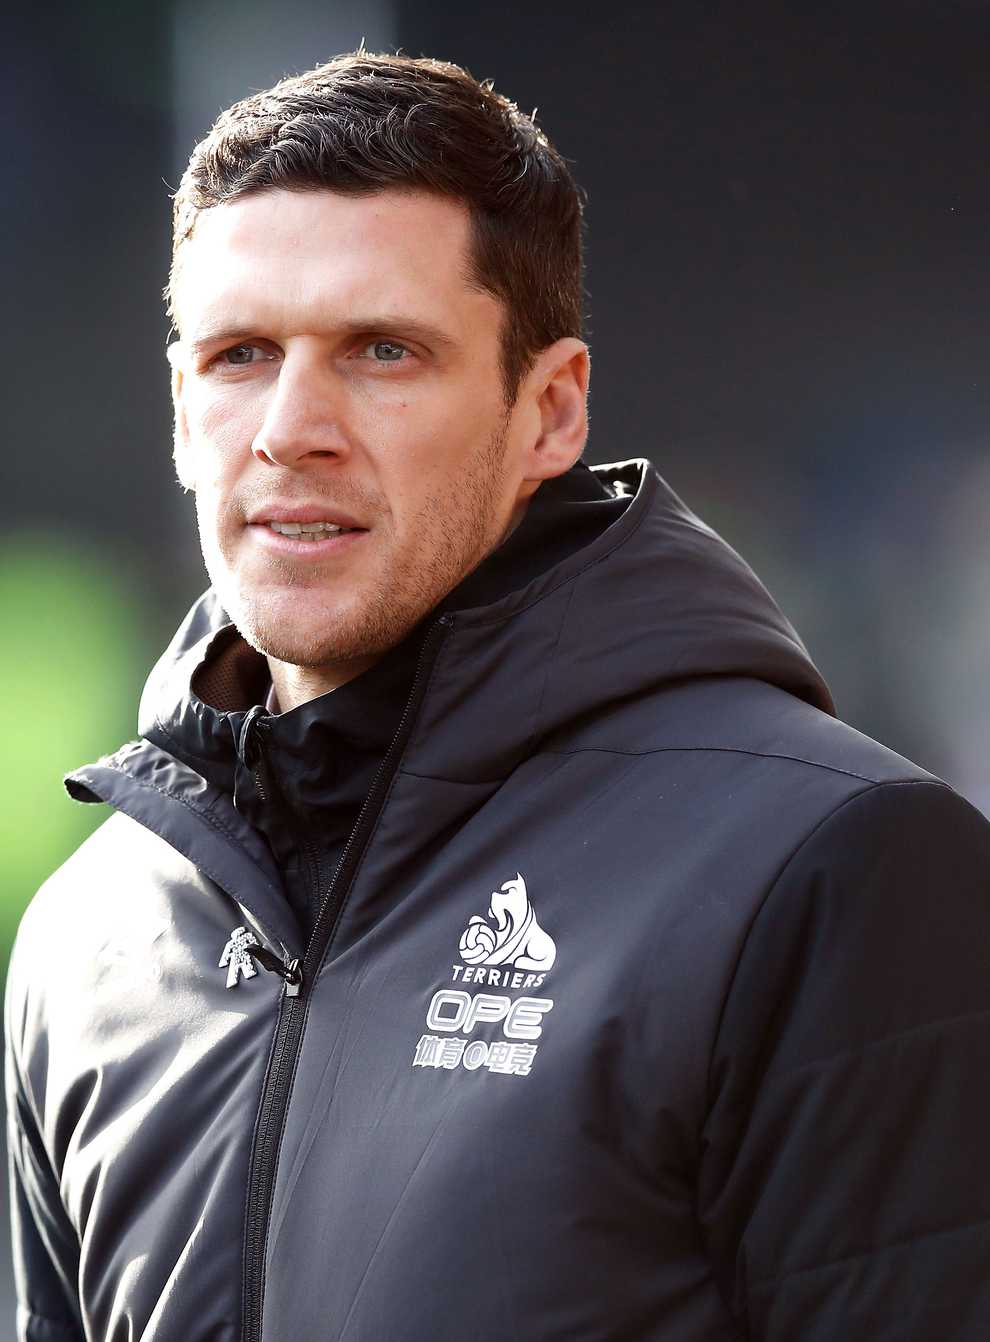 Interim Cardiff boss Mark Hudson praised his players’ spirit after they drew his first game in charge against Burnley (Martin Rickett/PA)